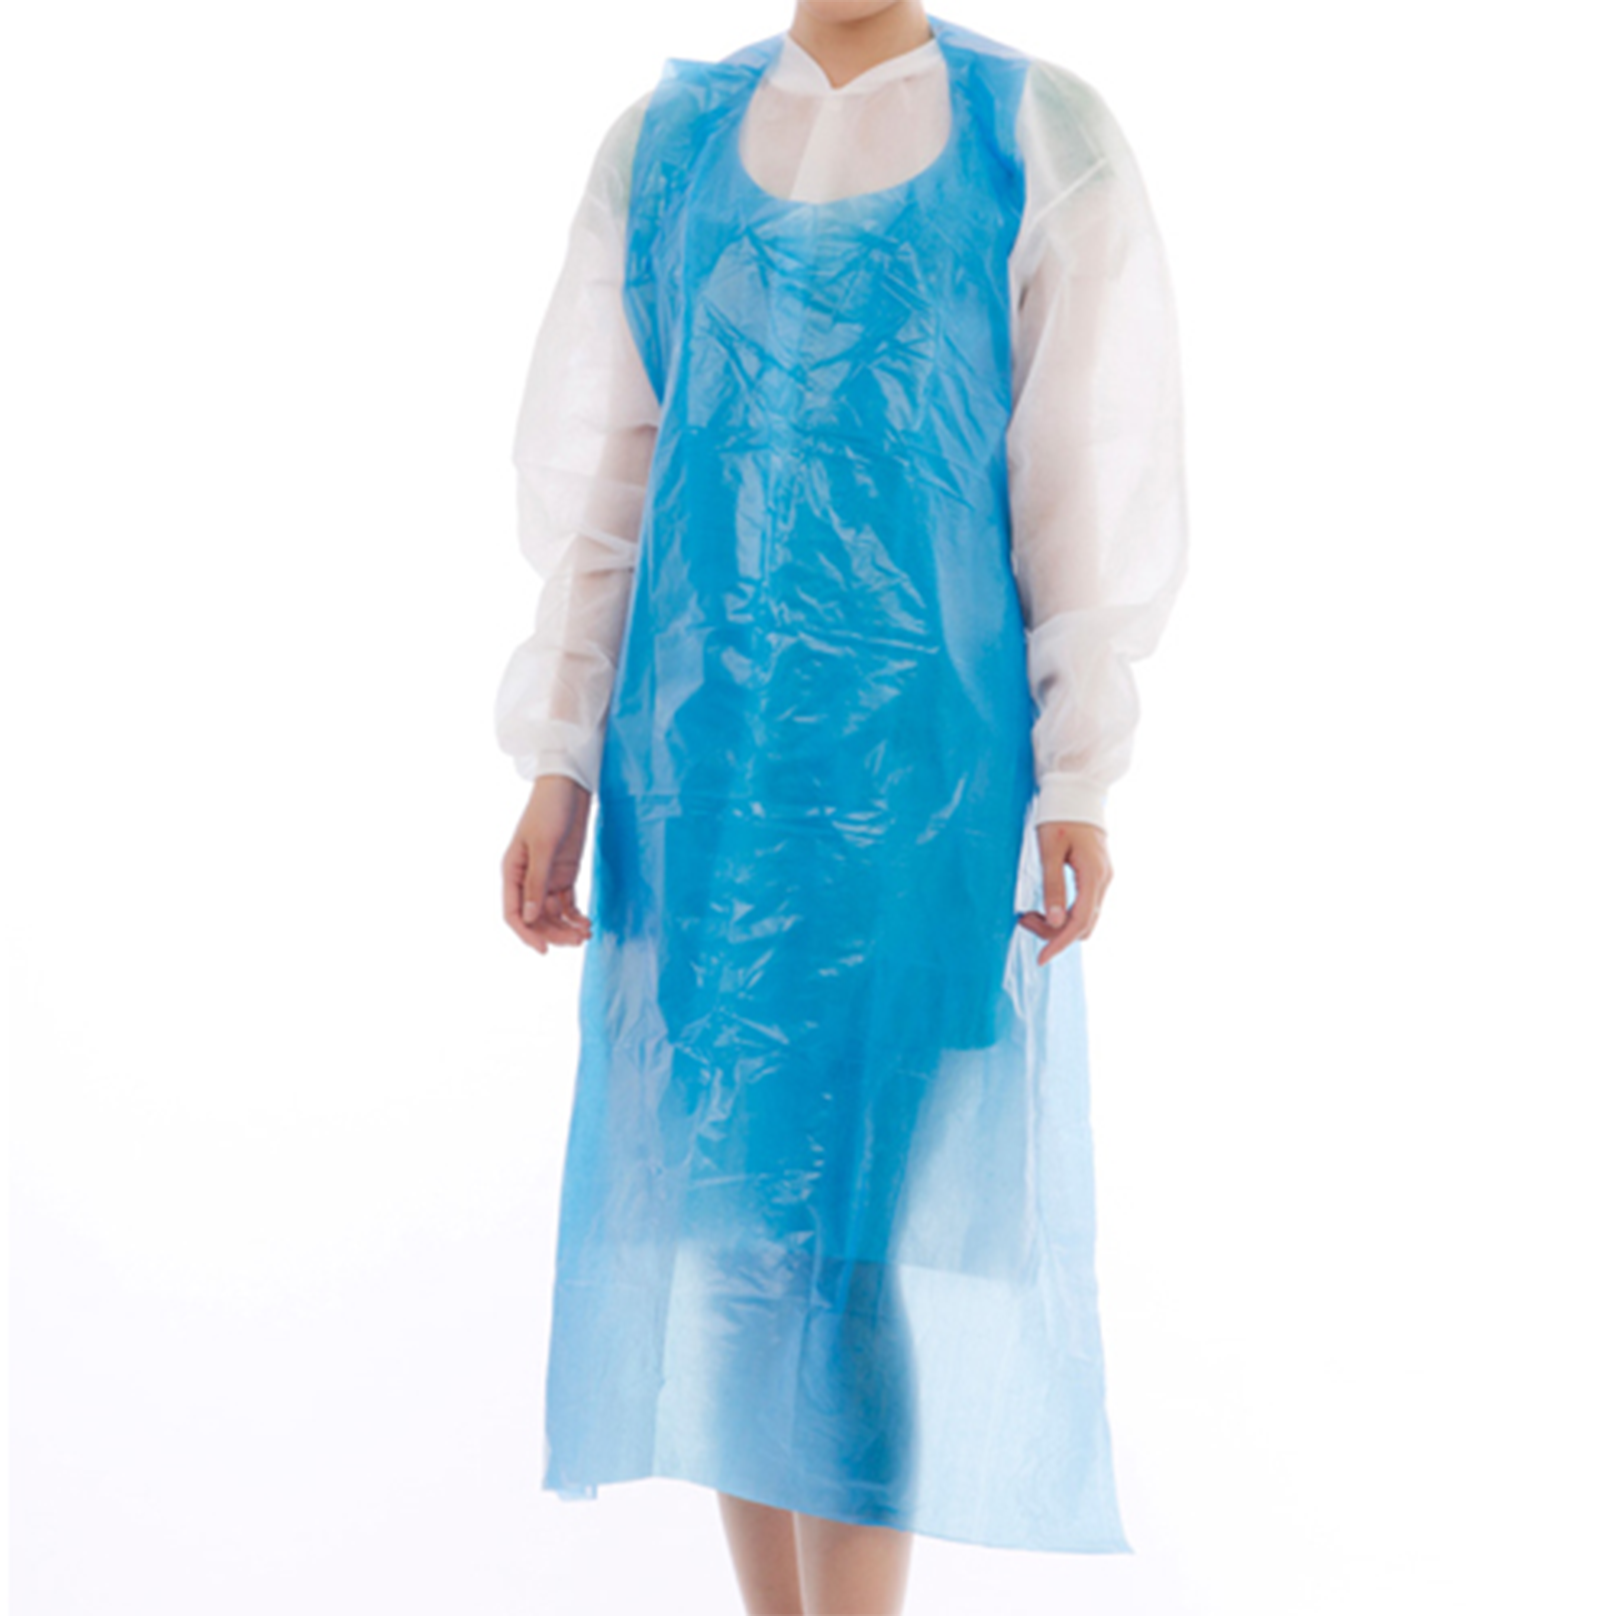 Stay Safe and Sanitary with PharmPak’s Disposable Plastic Aprons